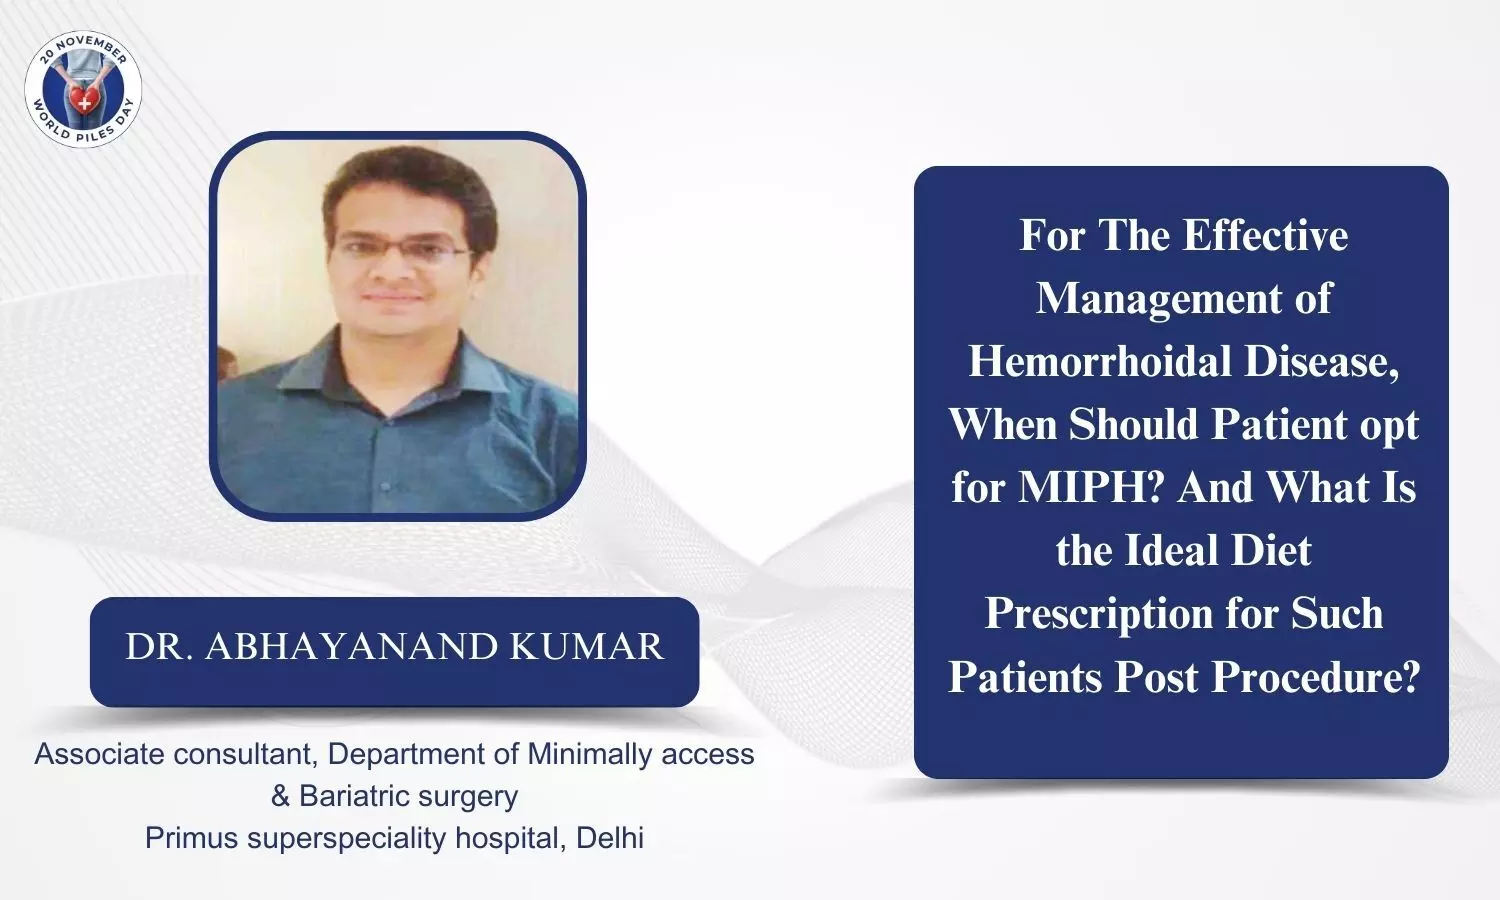 When should a patient opt for MIPH for the management of hemorrhoidal disease? - Dr Abhayanand Kumar